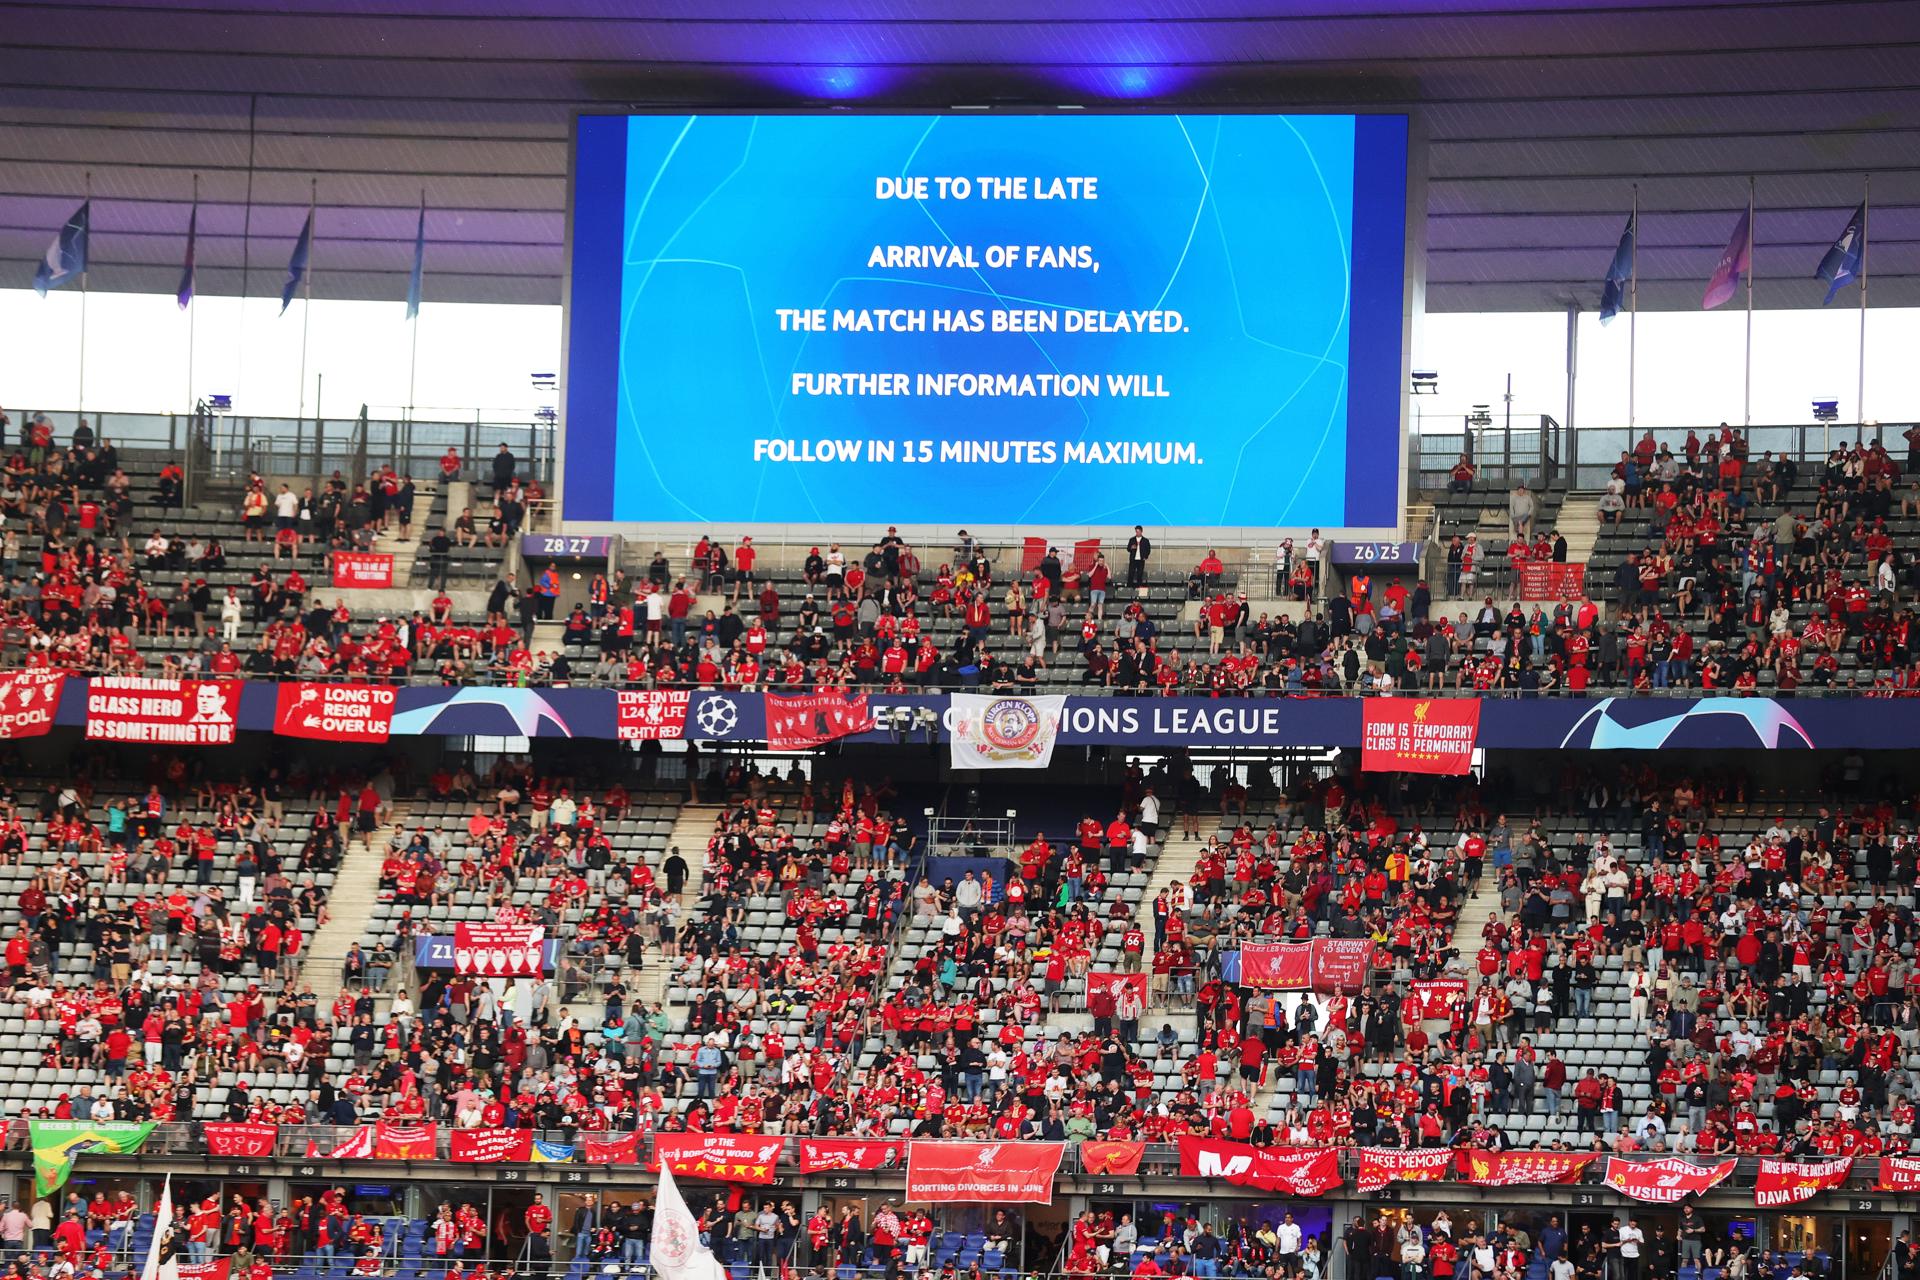 (FILE) An announcemnt for the delayed kick-off of the UEFA Champions League final between Liverpool FC and Real Madrid at Stade de France in Saint-Denis, near Paris, France, 28 May 2022. EFE/EPA/FRIEDEMANN VOGEL